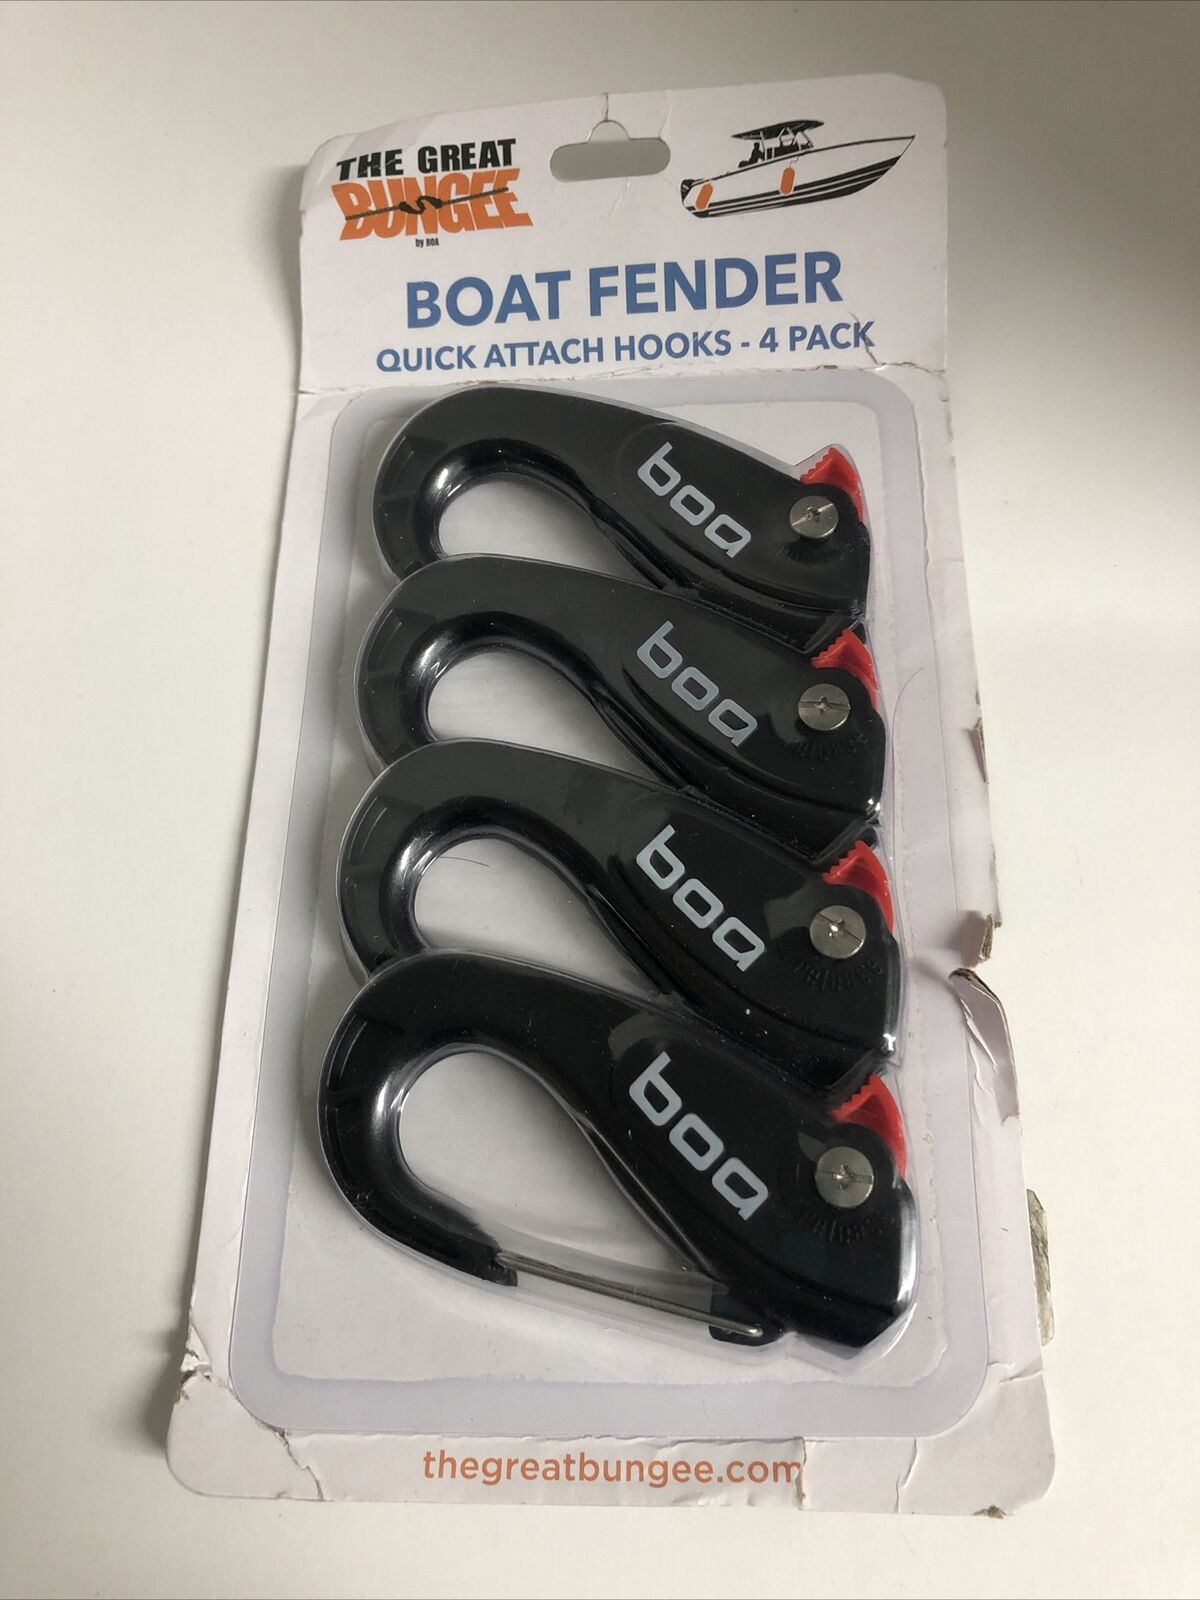 The Great Bungee Adjustable Boat Fender Clips Quick Attach Hooks